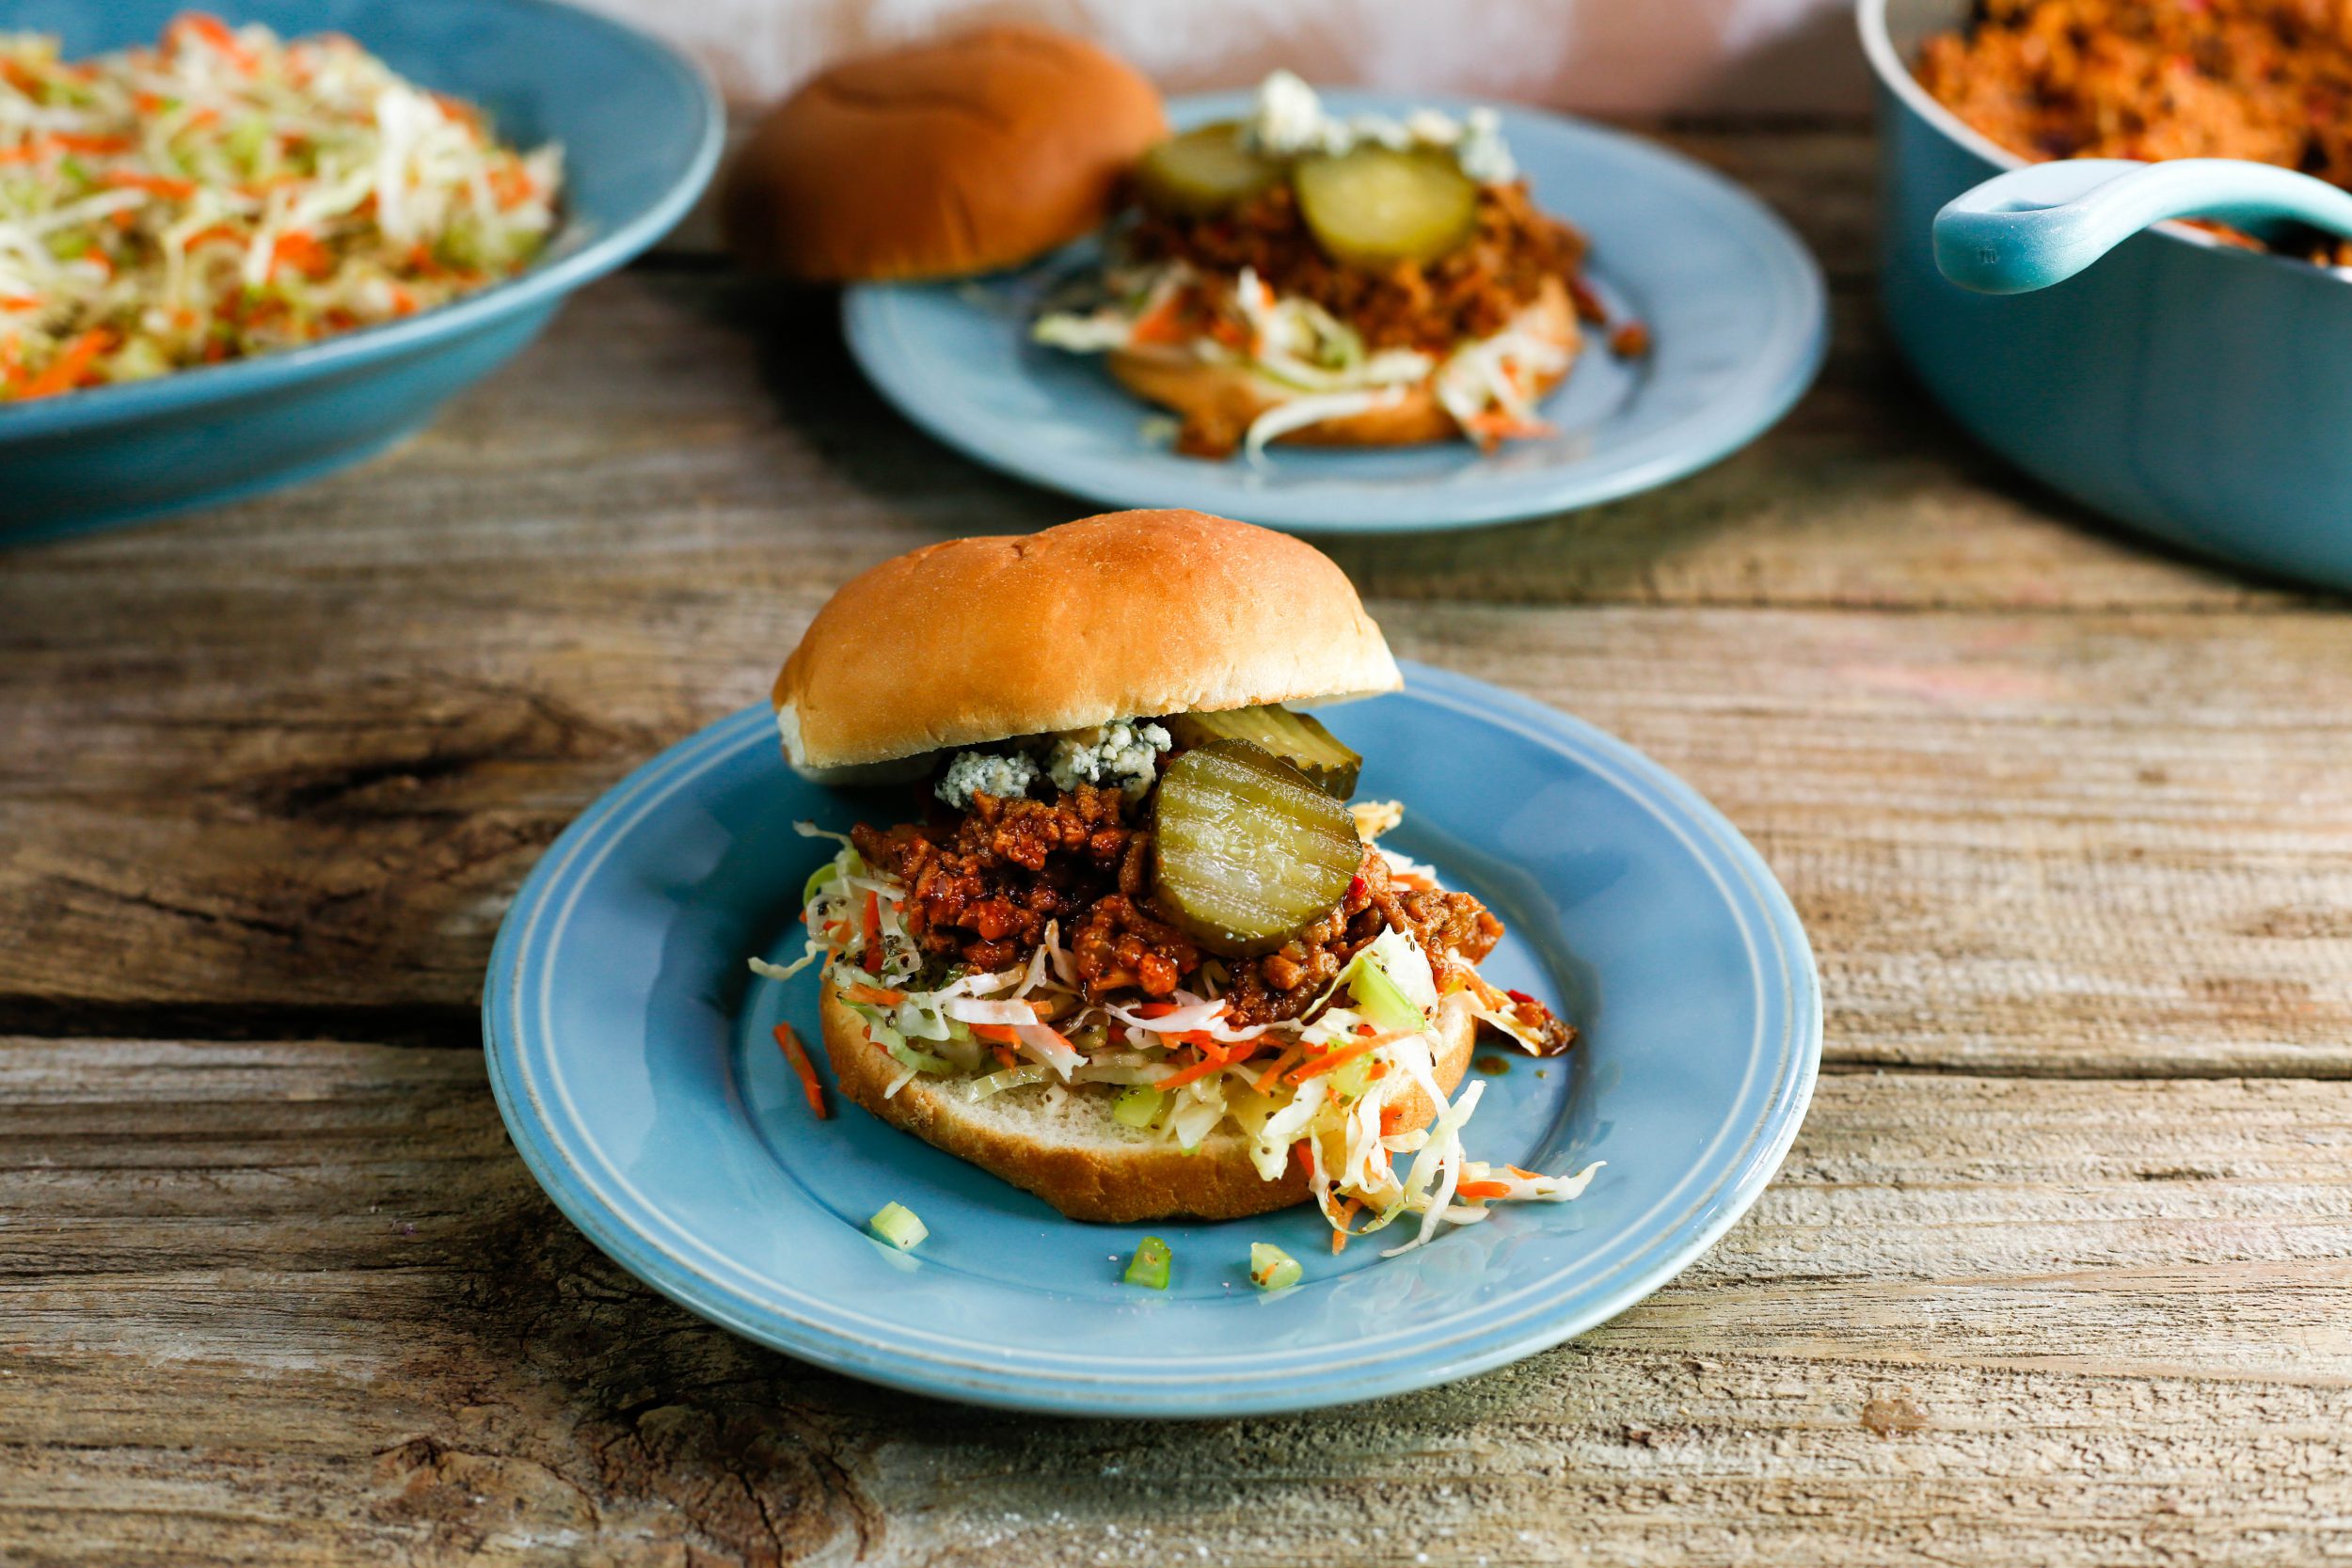 Buffalo Joes with Blue Cheese and Carrot-Celery Slaw Relish